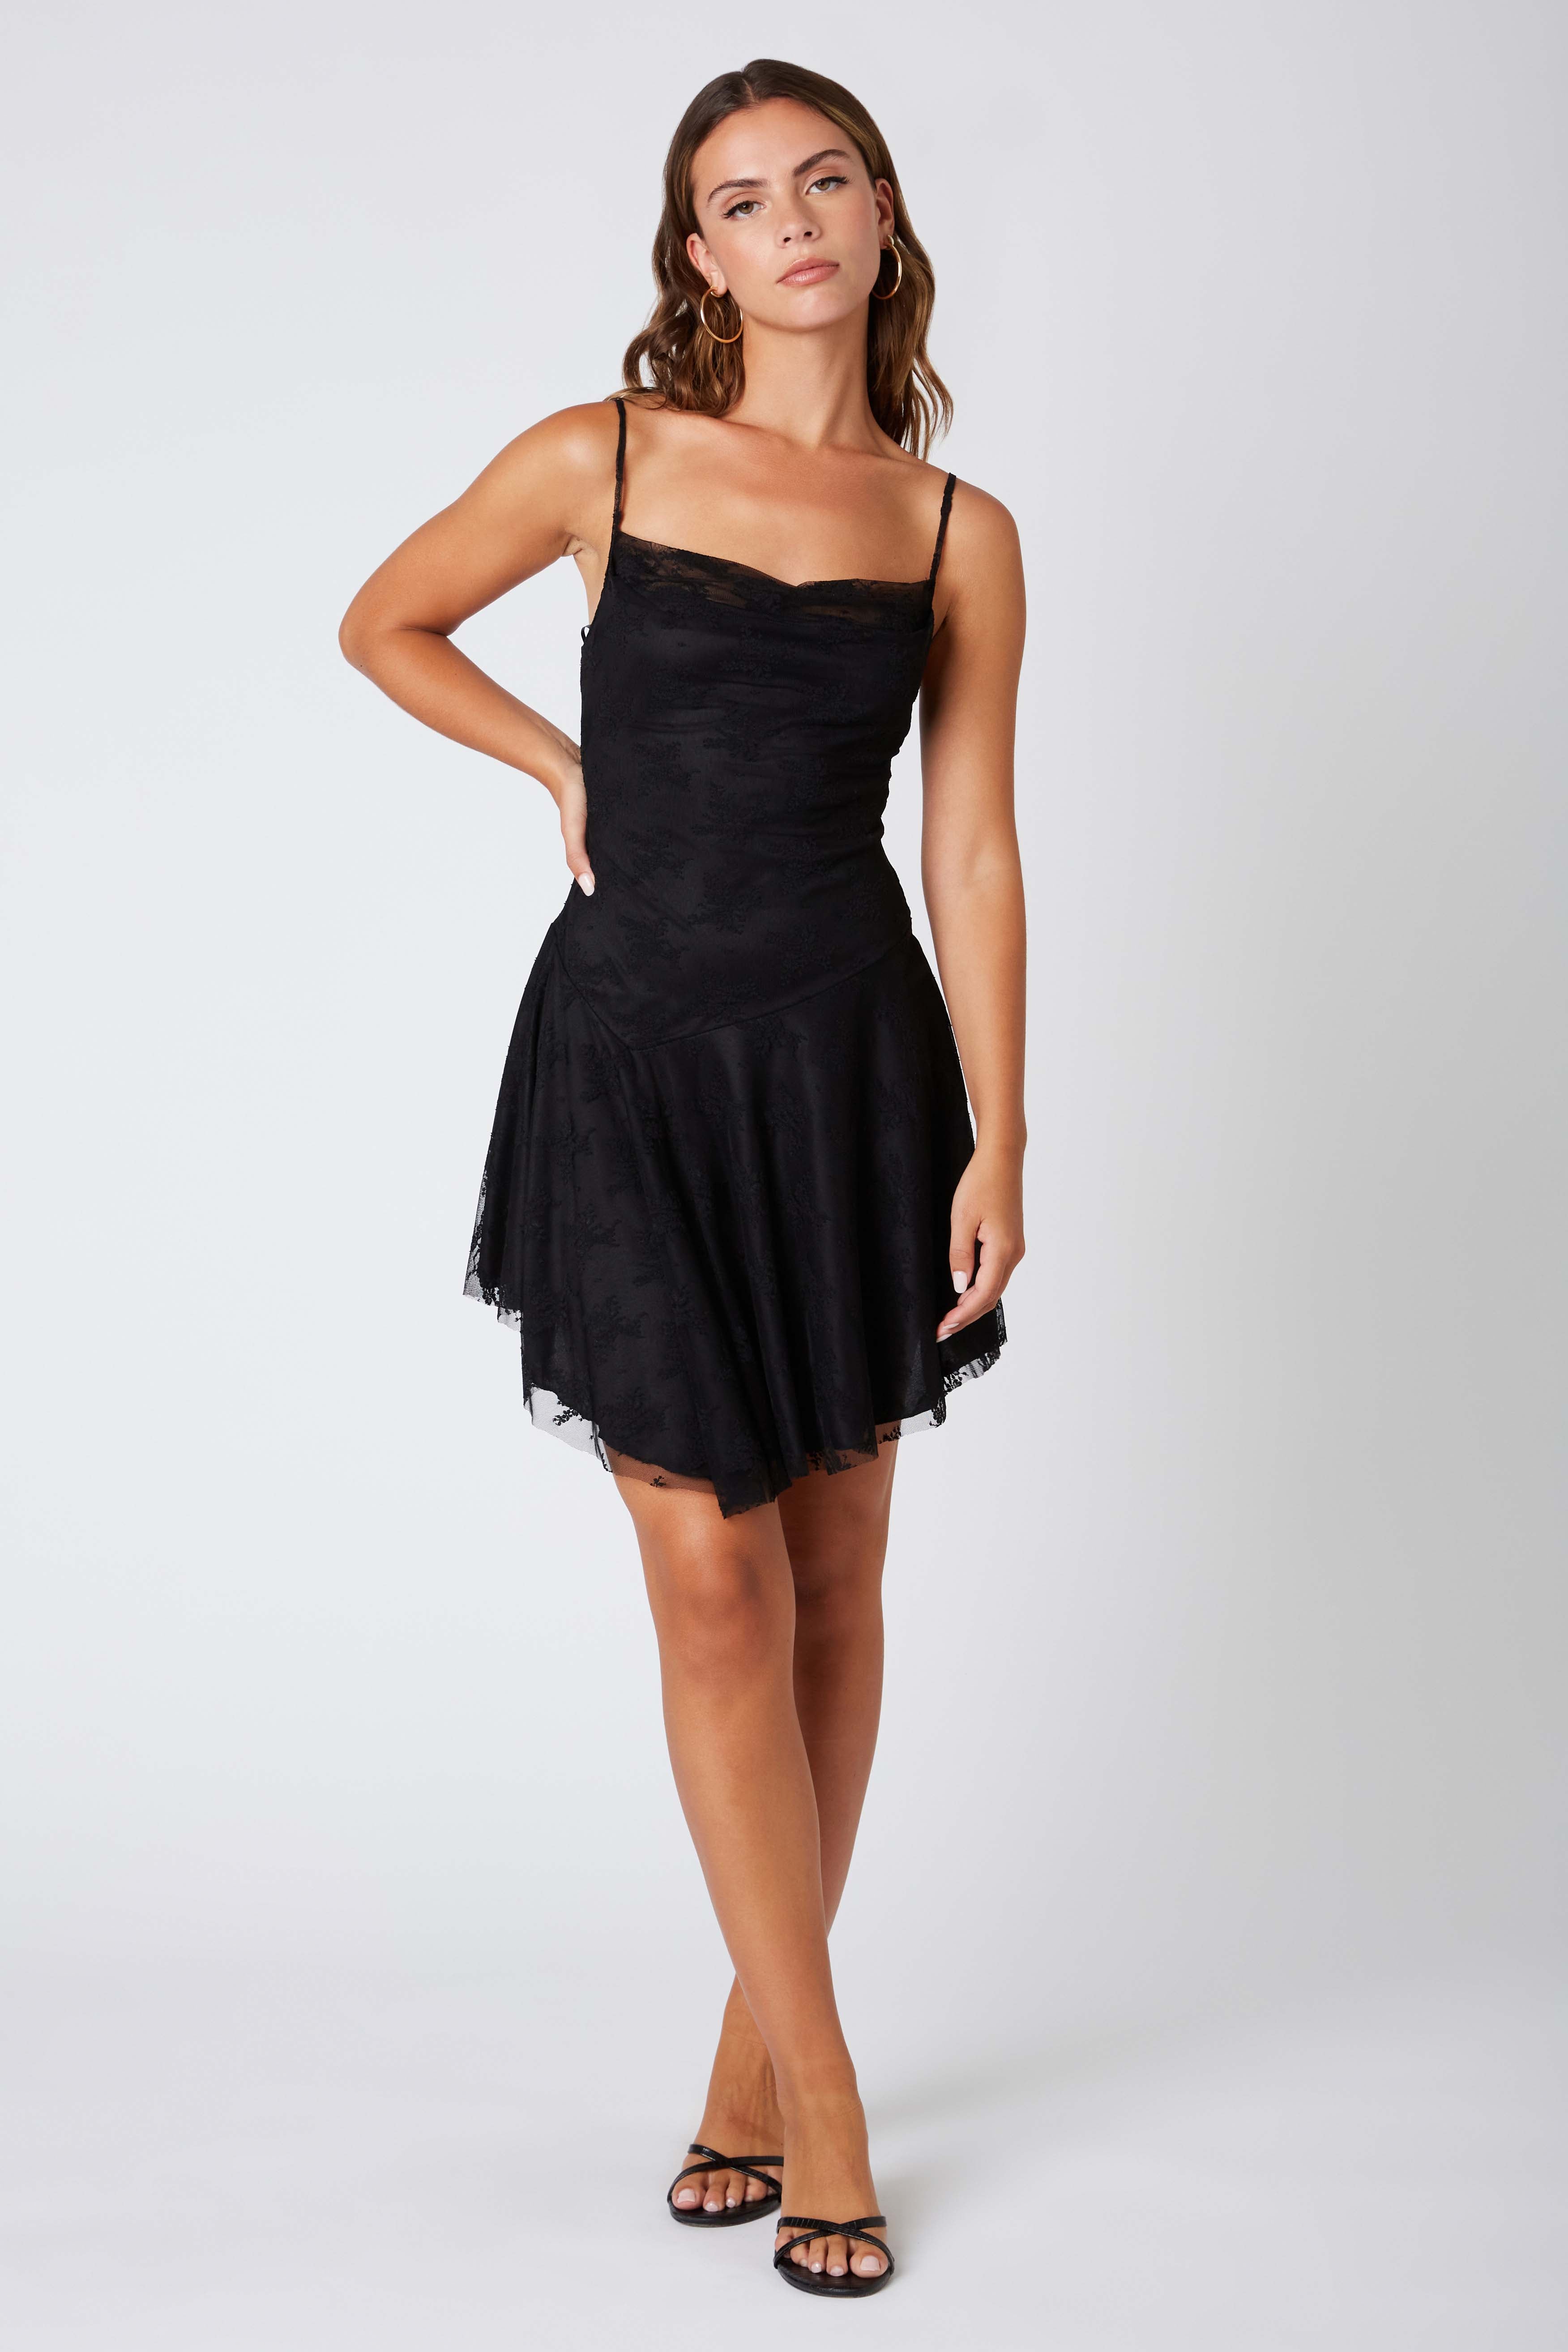 Lace Asymmetrical Dress in Black Front View